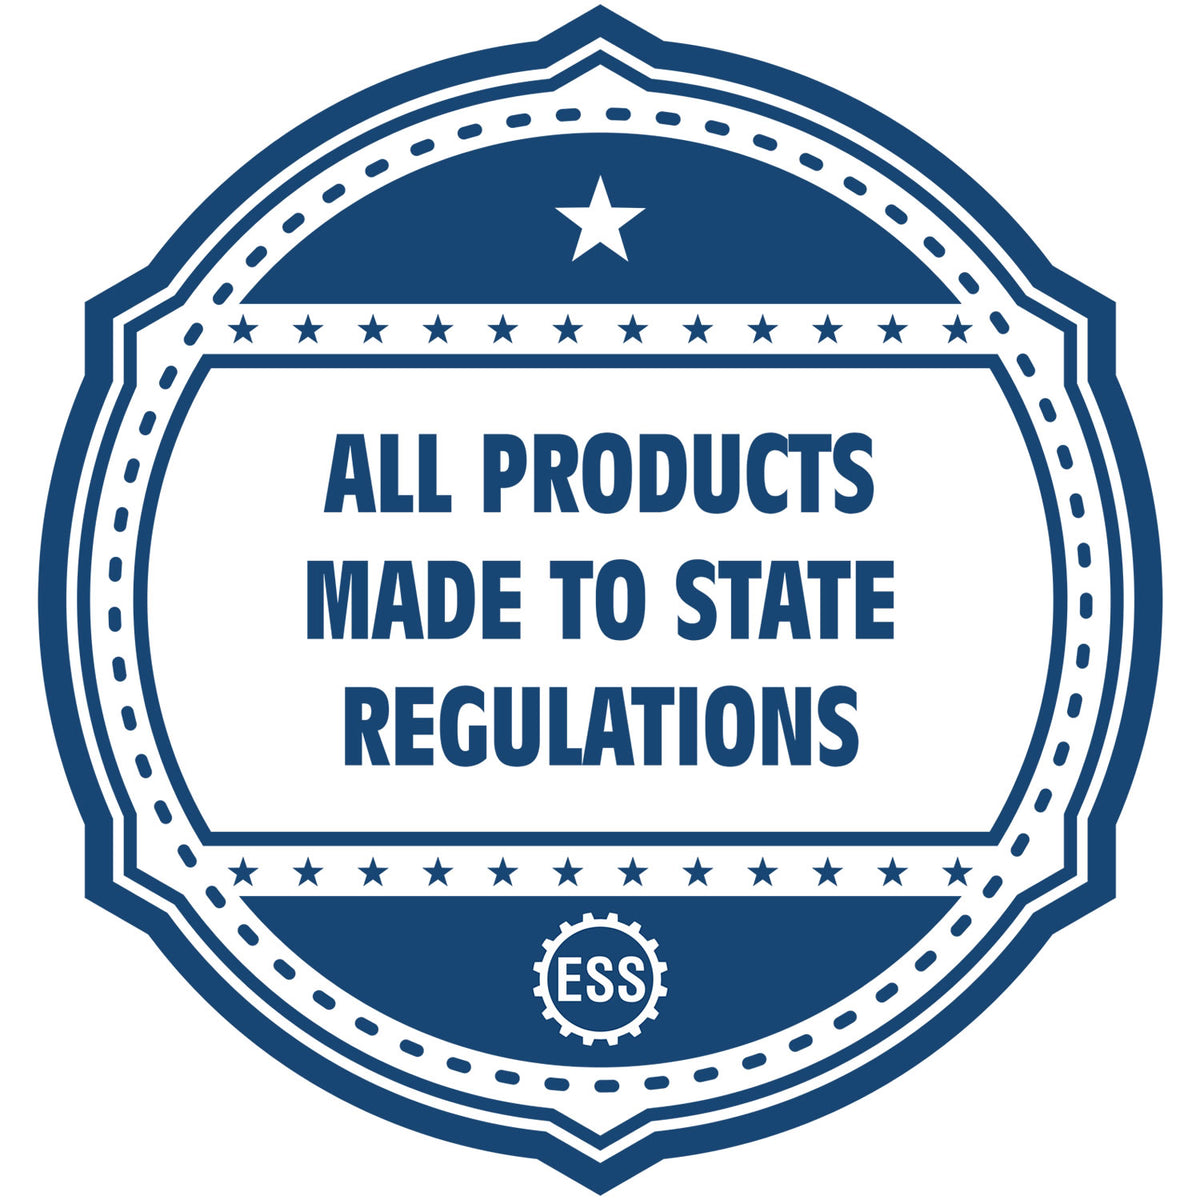 An icon or badge element for the Premium MaxLight Pre-Inked Washington Engineering Stamp showing that this product is made in compliance with state regulations.